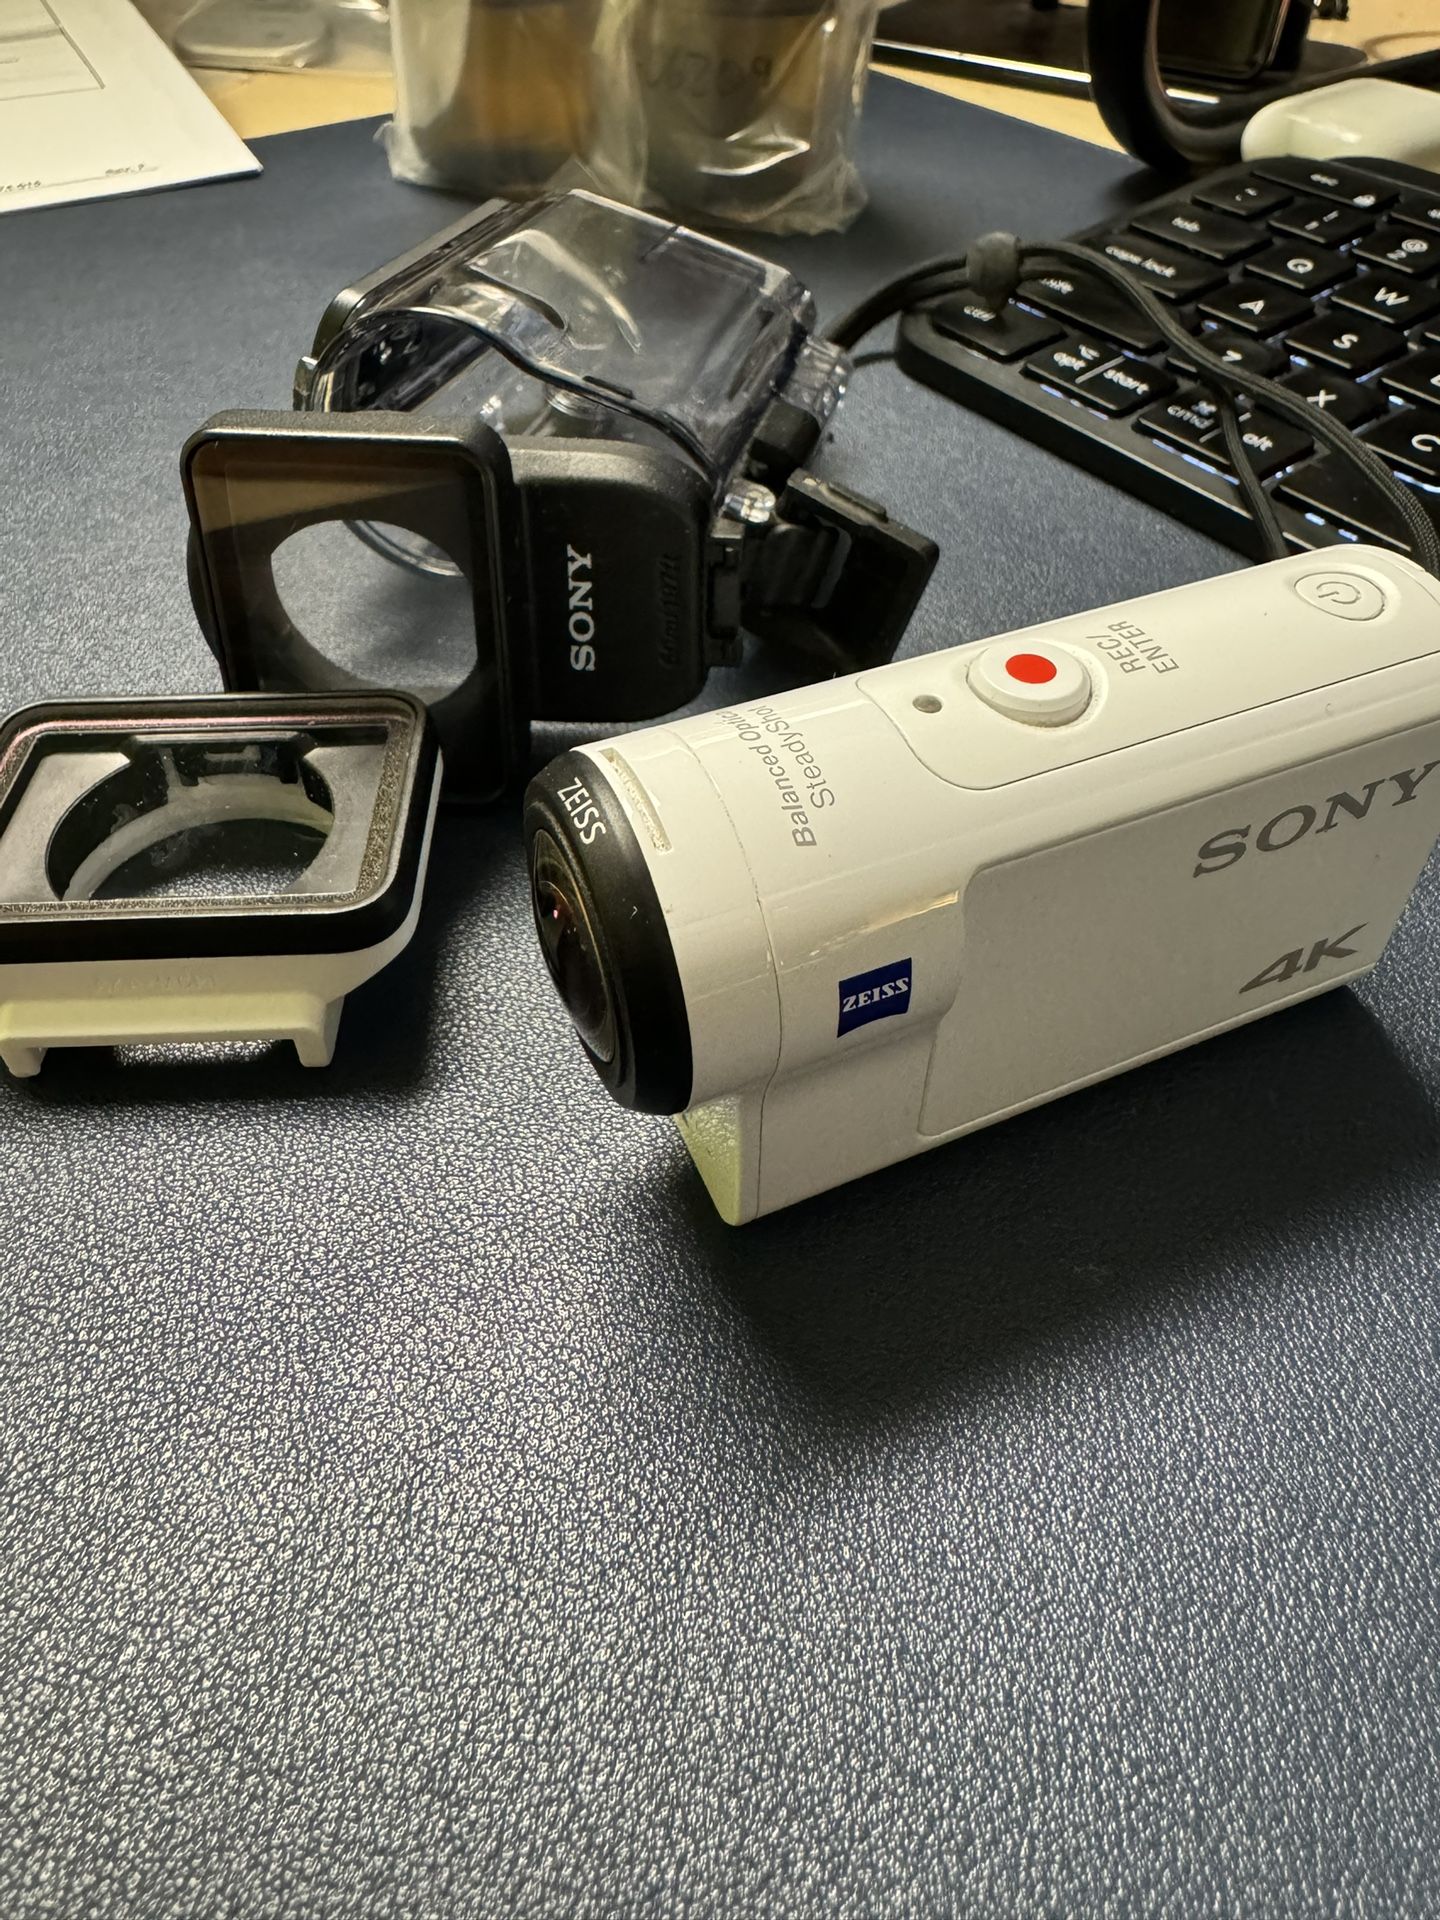 Sony 4K Action Cam FDR-X3000